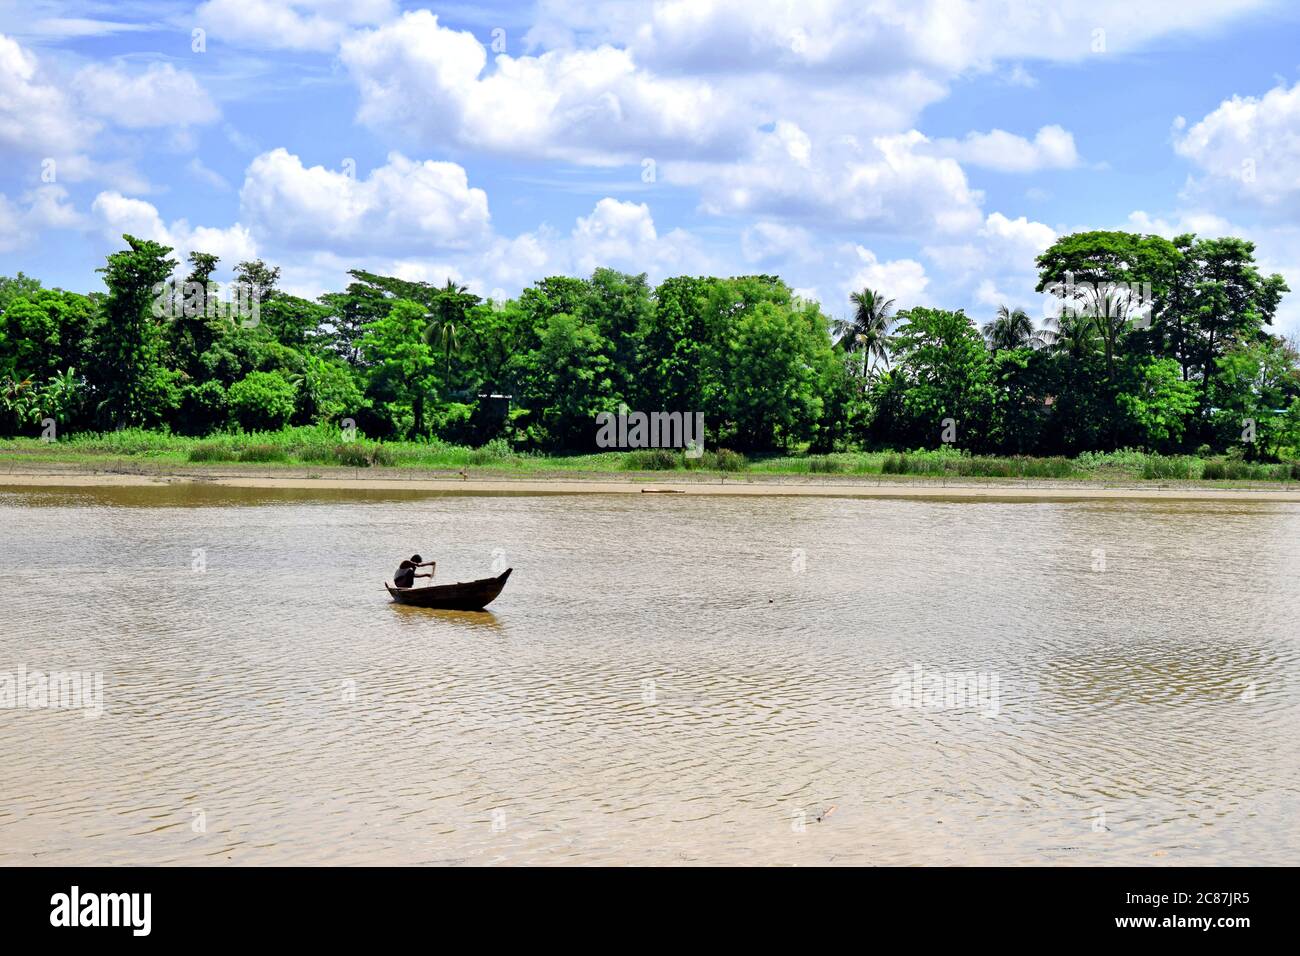 A man fishing by a boat at a river in Bangladesh Stock Photo